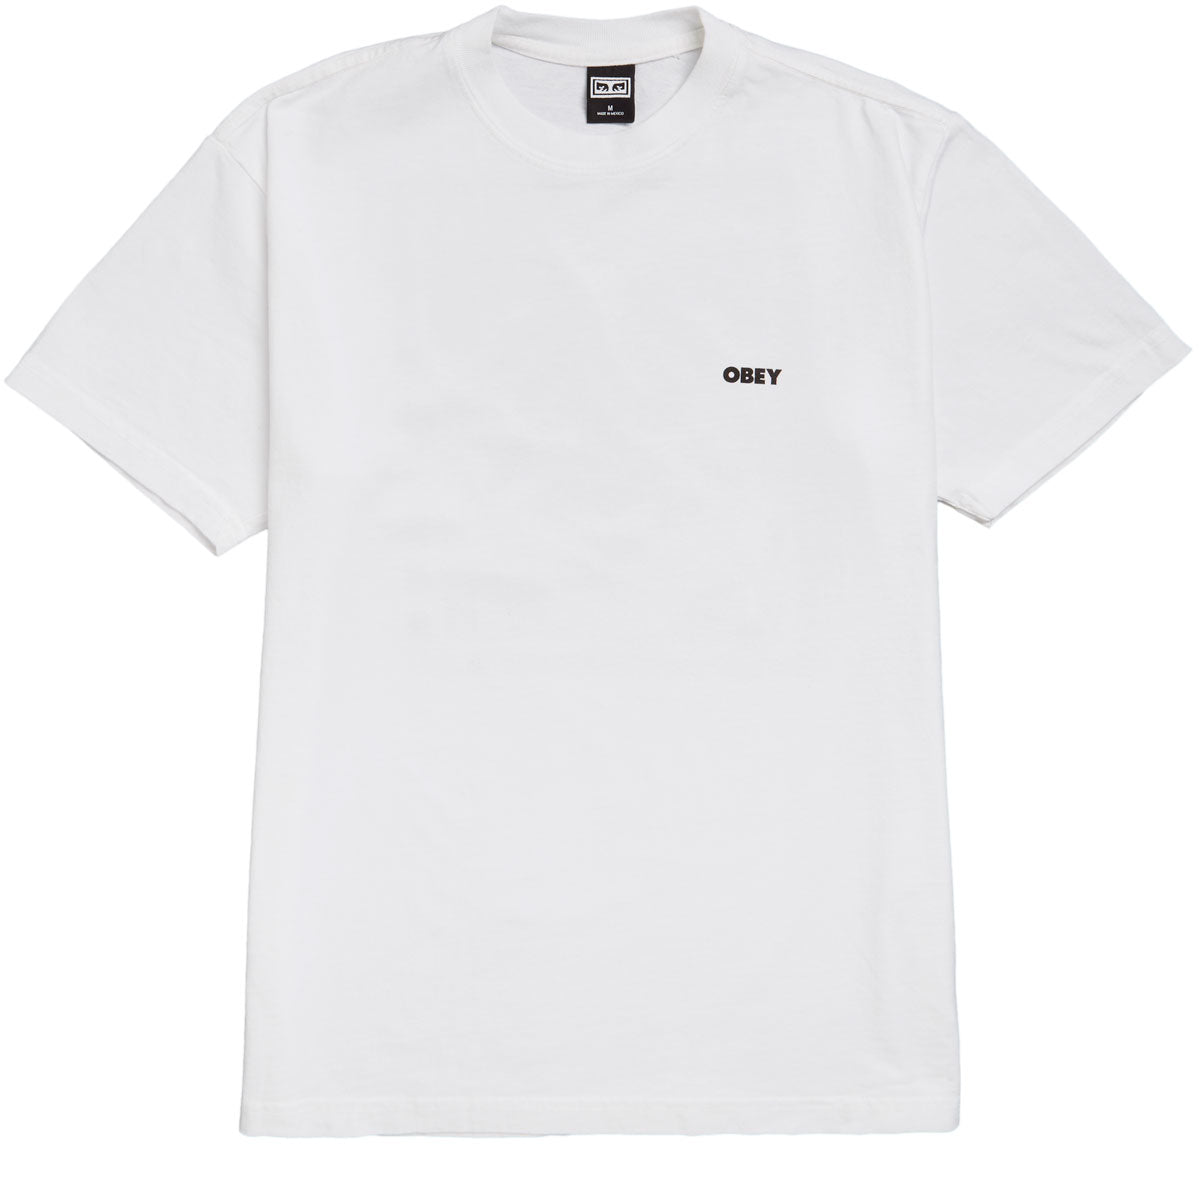 Obey Bold Icon Heavyweight T-Shirt - White image 2